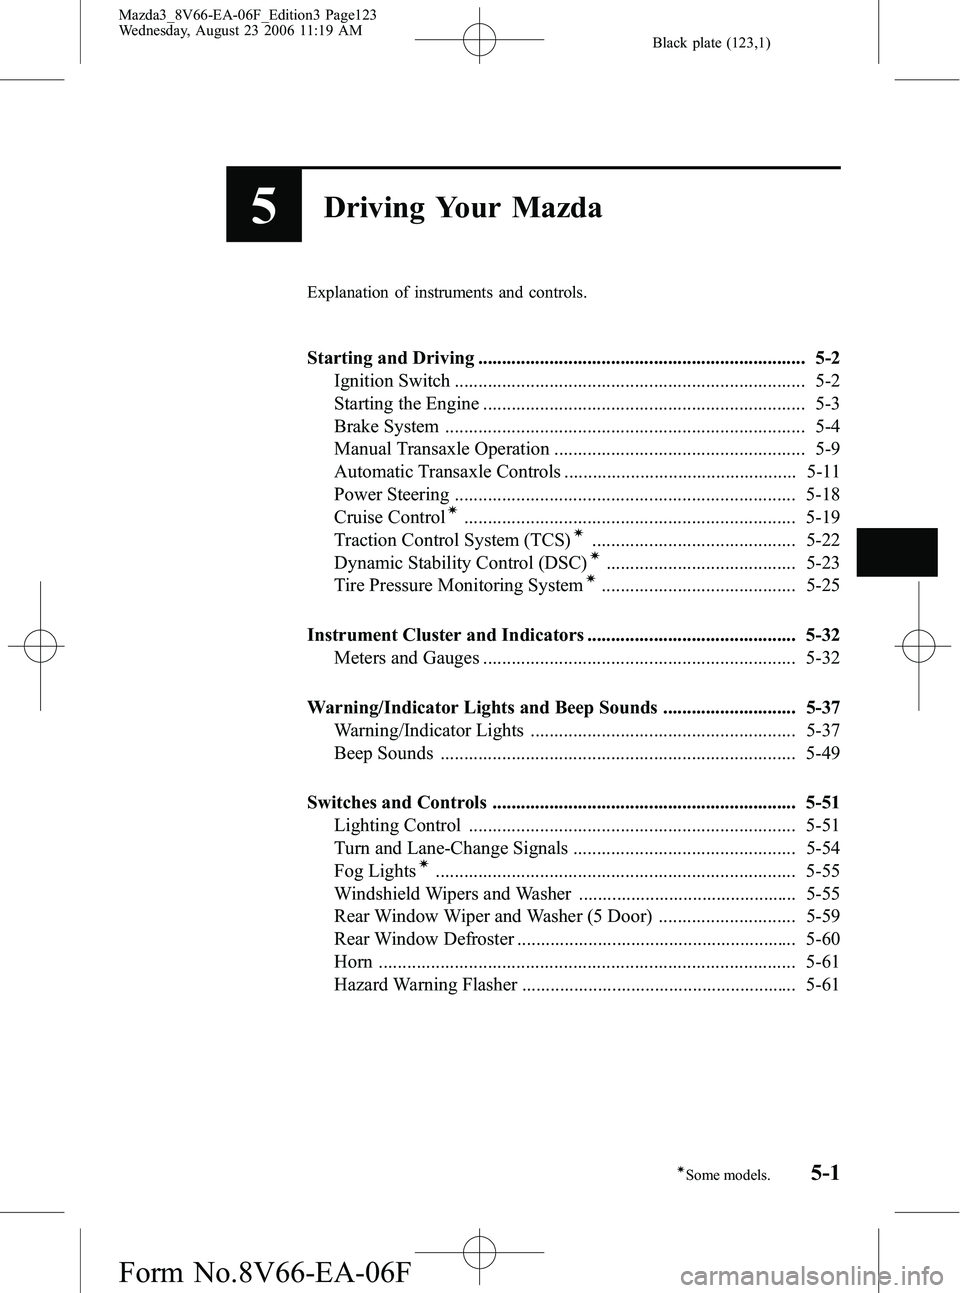 MAZDA MODEL 3 5-DOOR 2007  Owners Manual Black plate (123,1)
5Driving Your Mazda
Explanation of instruments and controls.
Starting and Driving ..................................................................... 5-2Ignition Switch .........